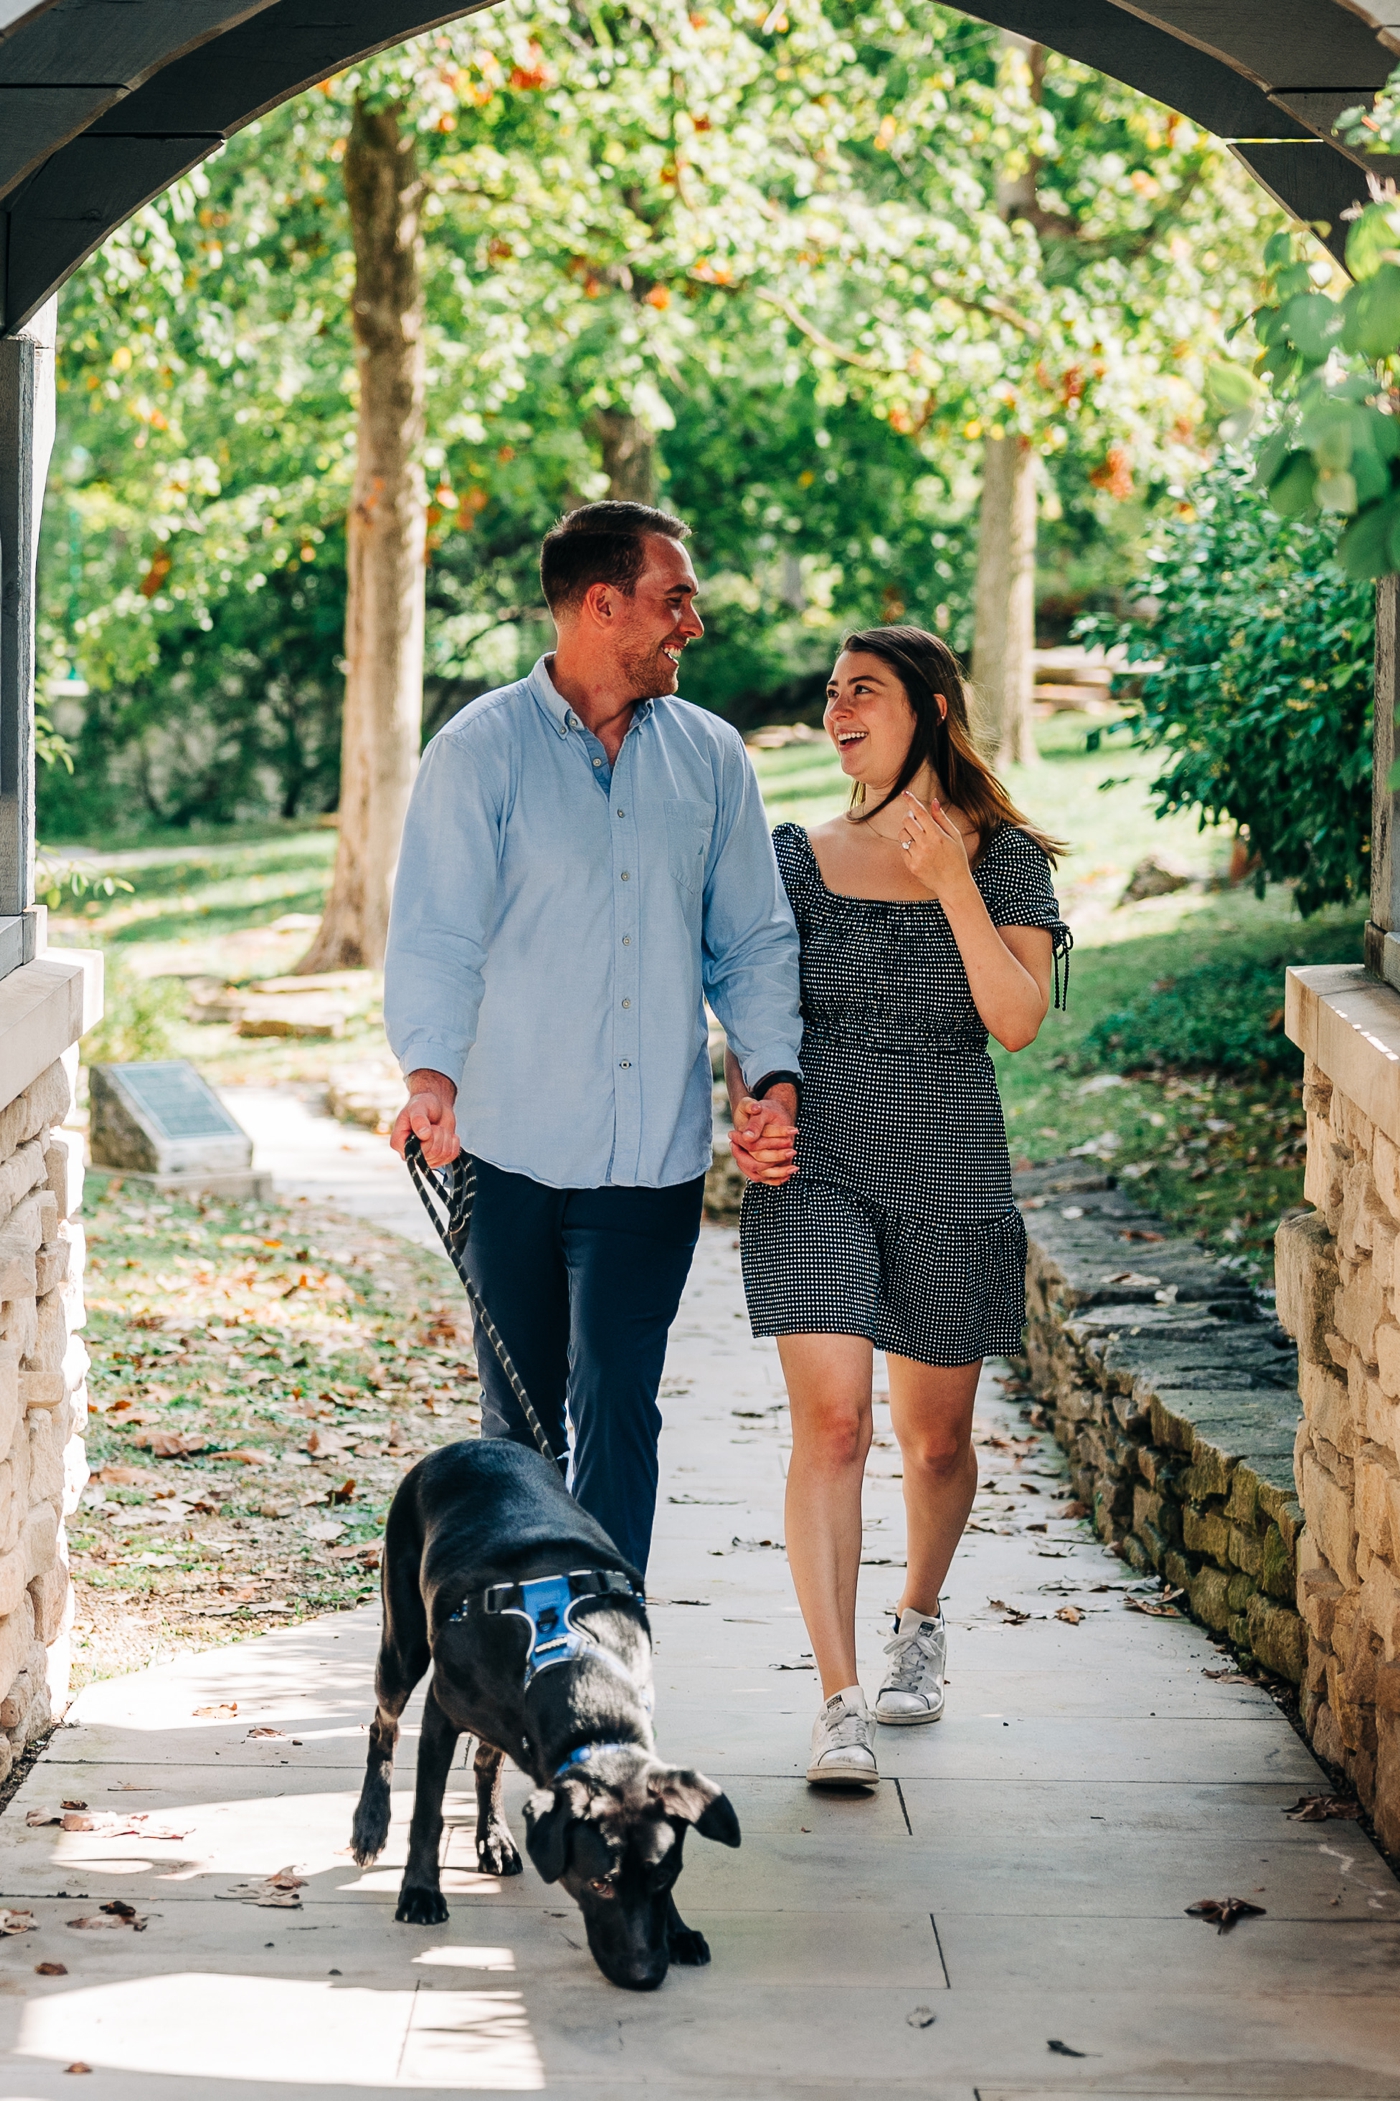 Engagement session tips